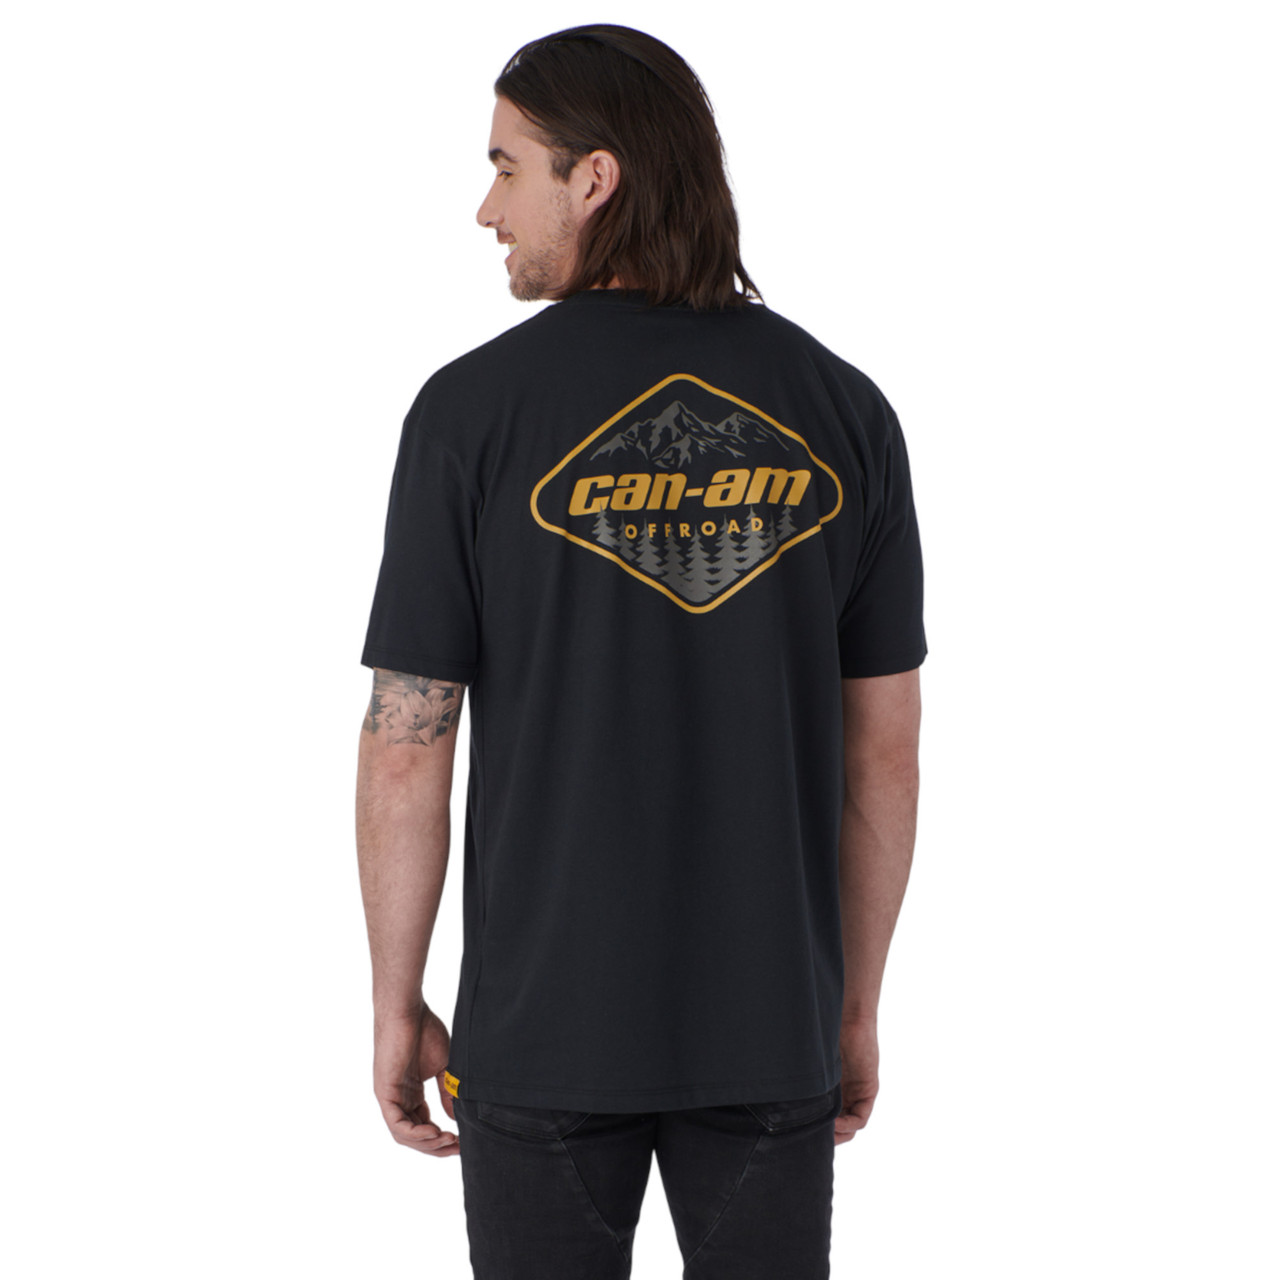 Can-Am New OEM, Men's 2XL Polyester Branded Off-Road T-Shirt, 4547591490